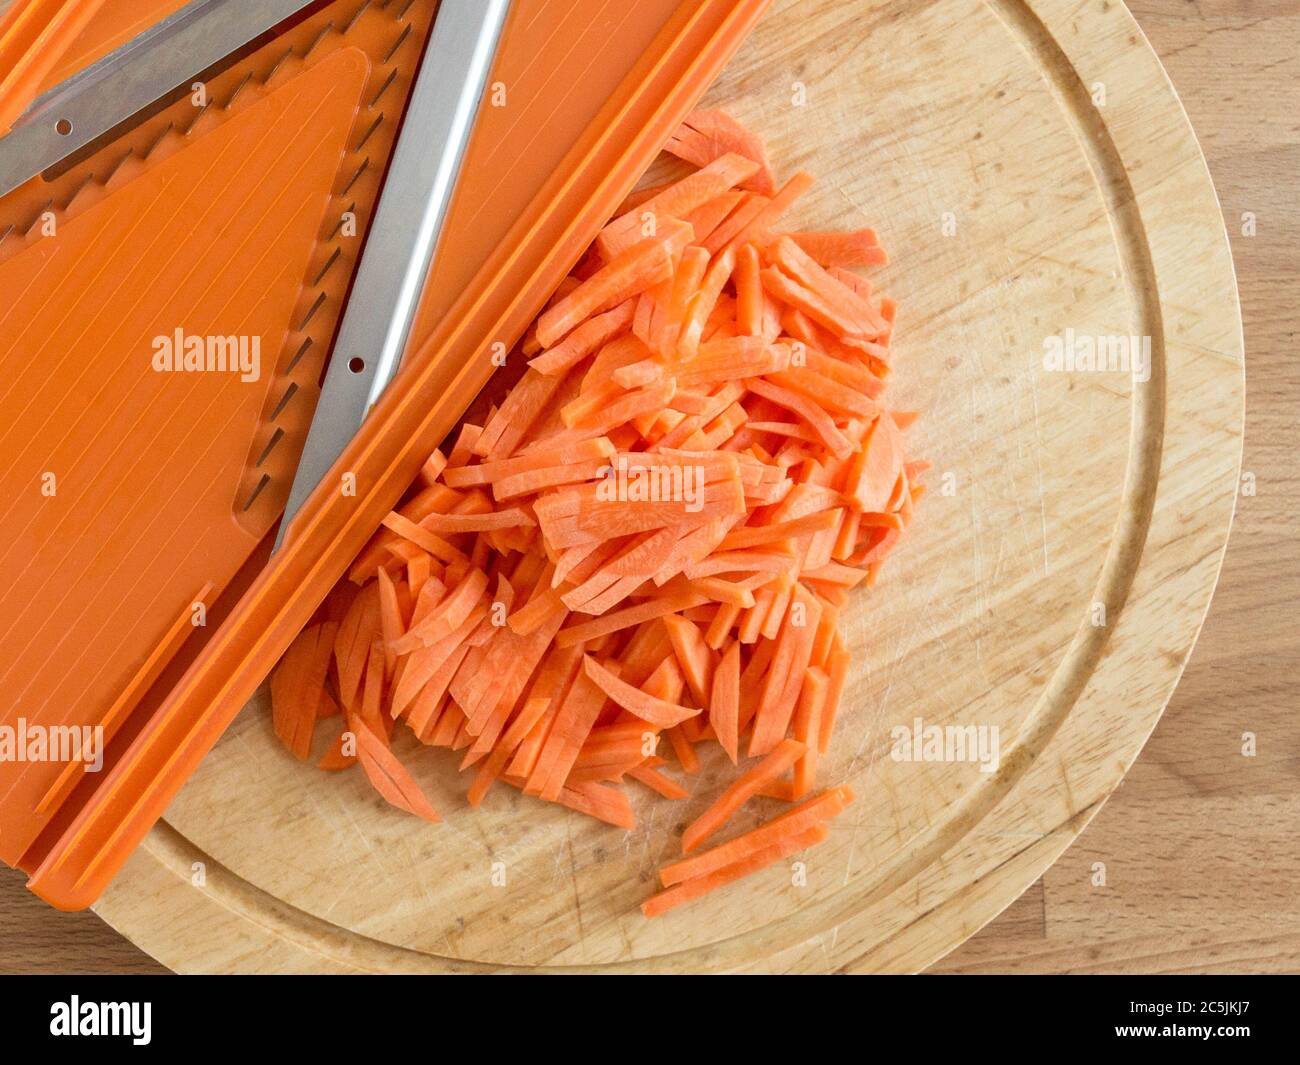 Electric Razor with an Attachment for Cutting Vegetables. Stock Image -  Image of beaten, chopping: 185244205